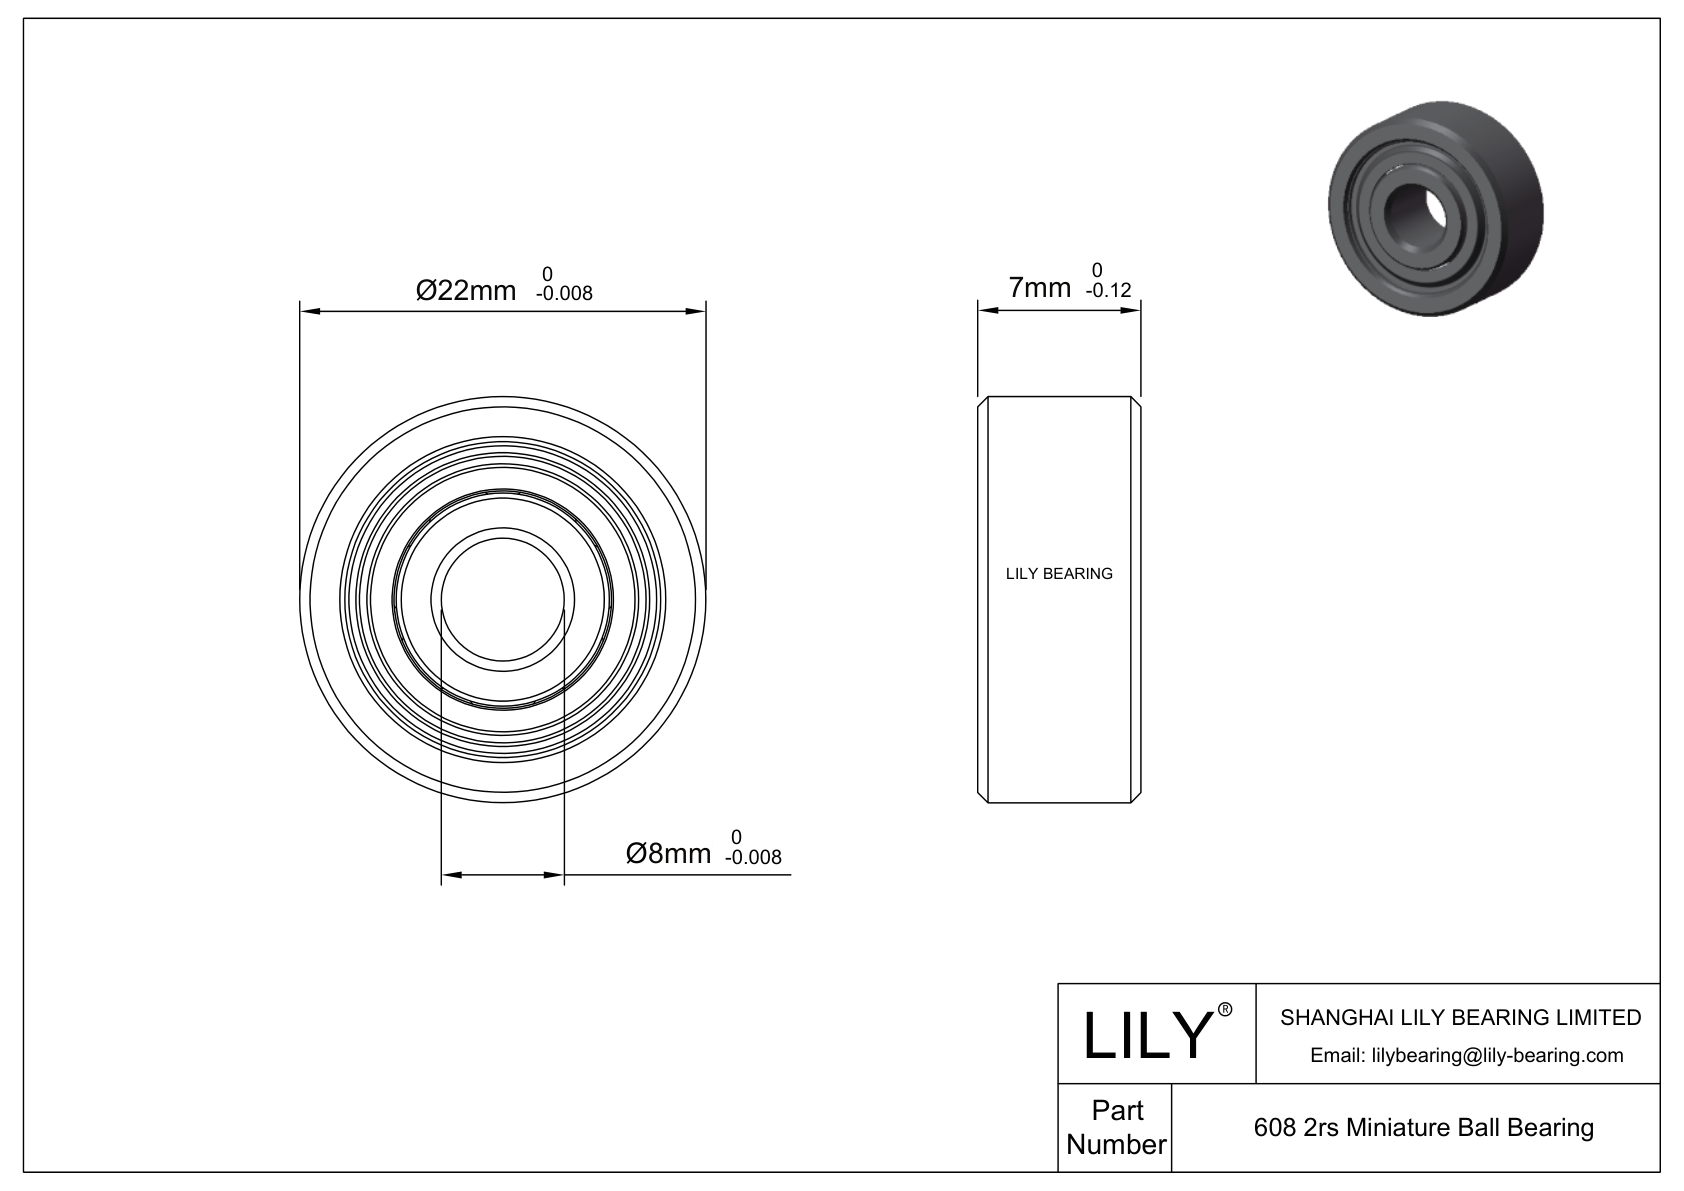 LILY-BS60840-13 POM Coated Bearing cad drawing